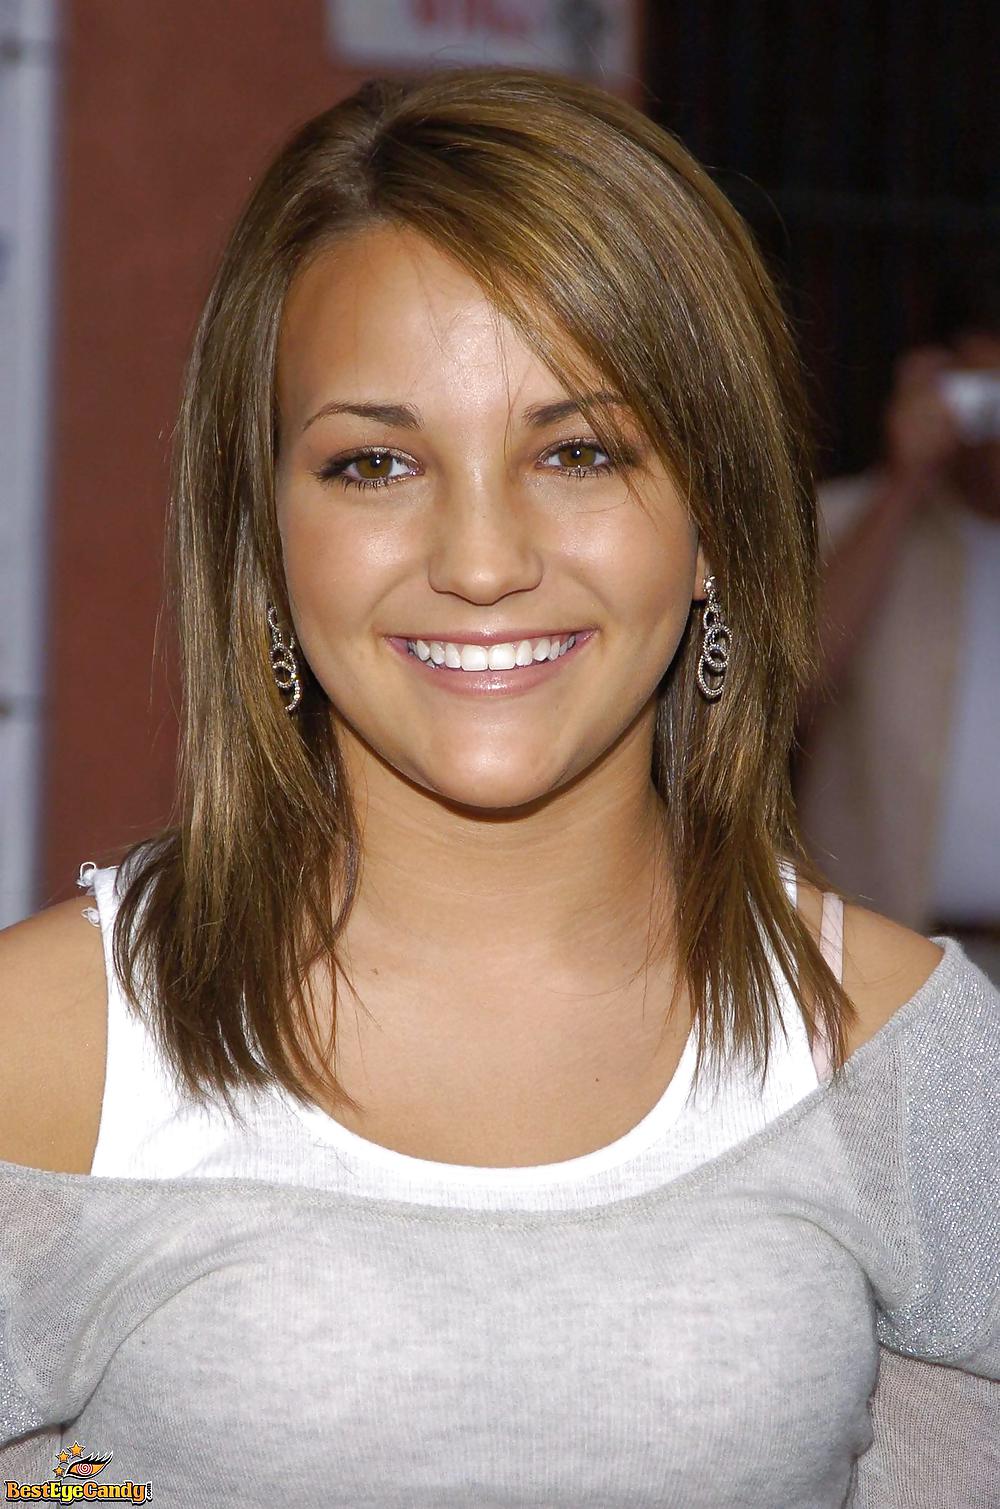 Jamie Lynn Spears Mix Des Images Fakes #22187548